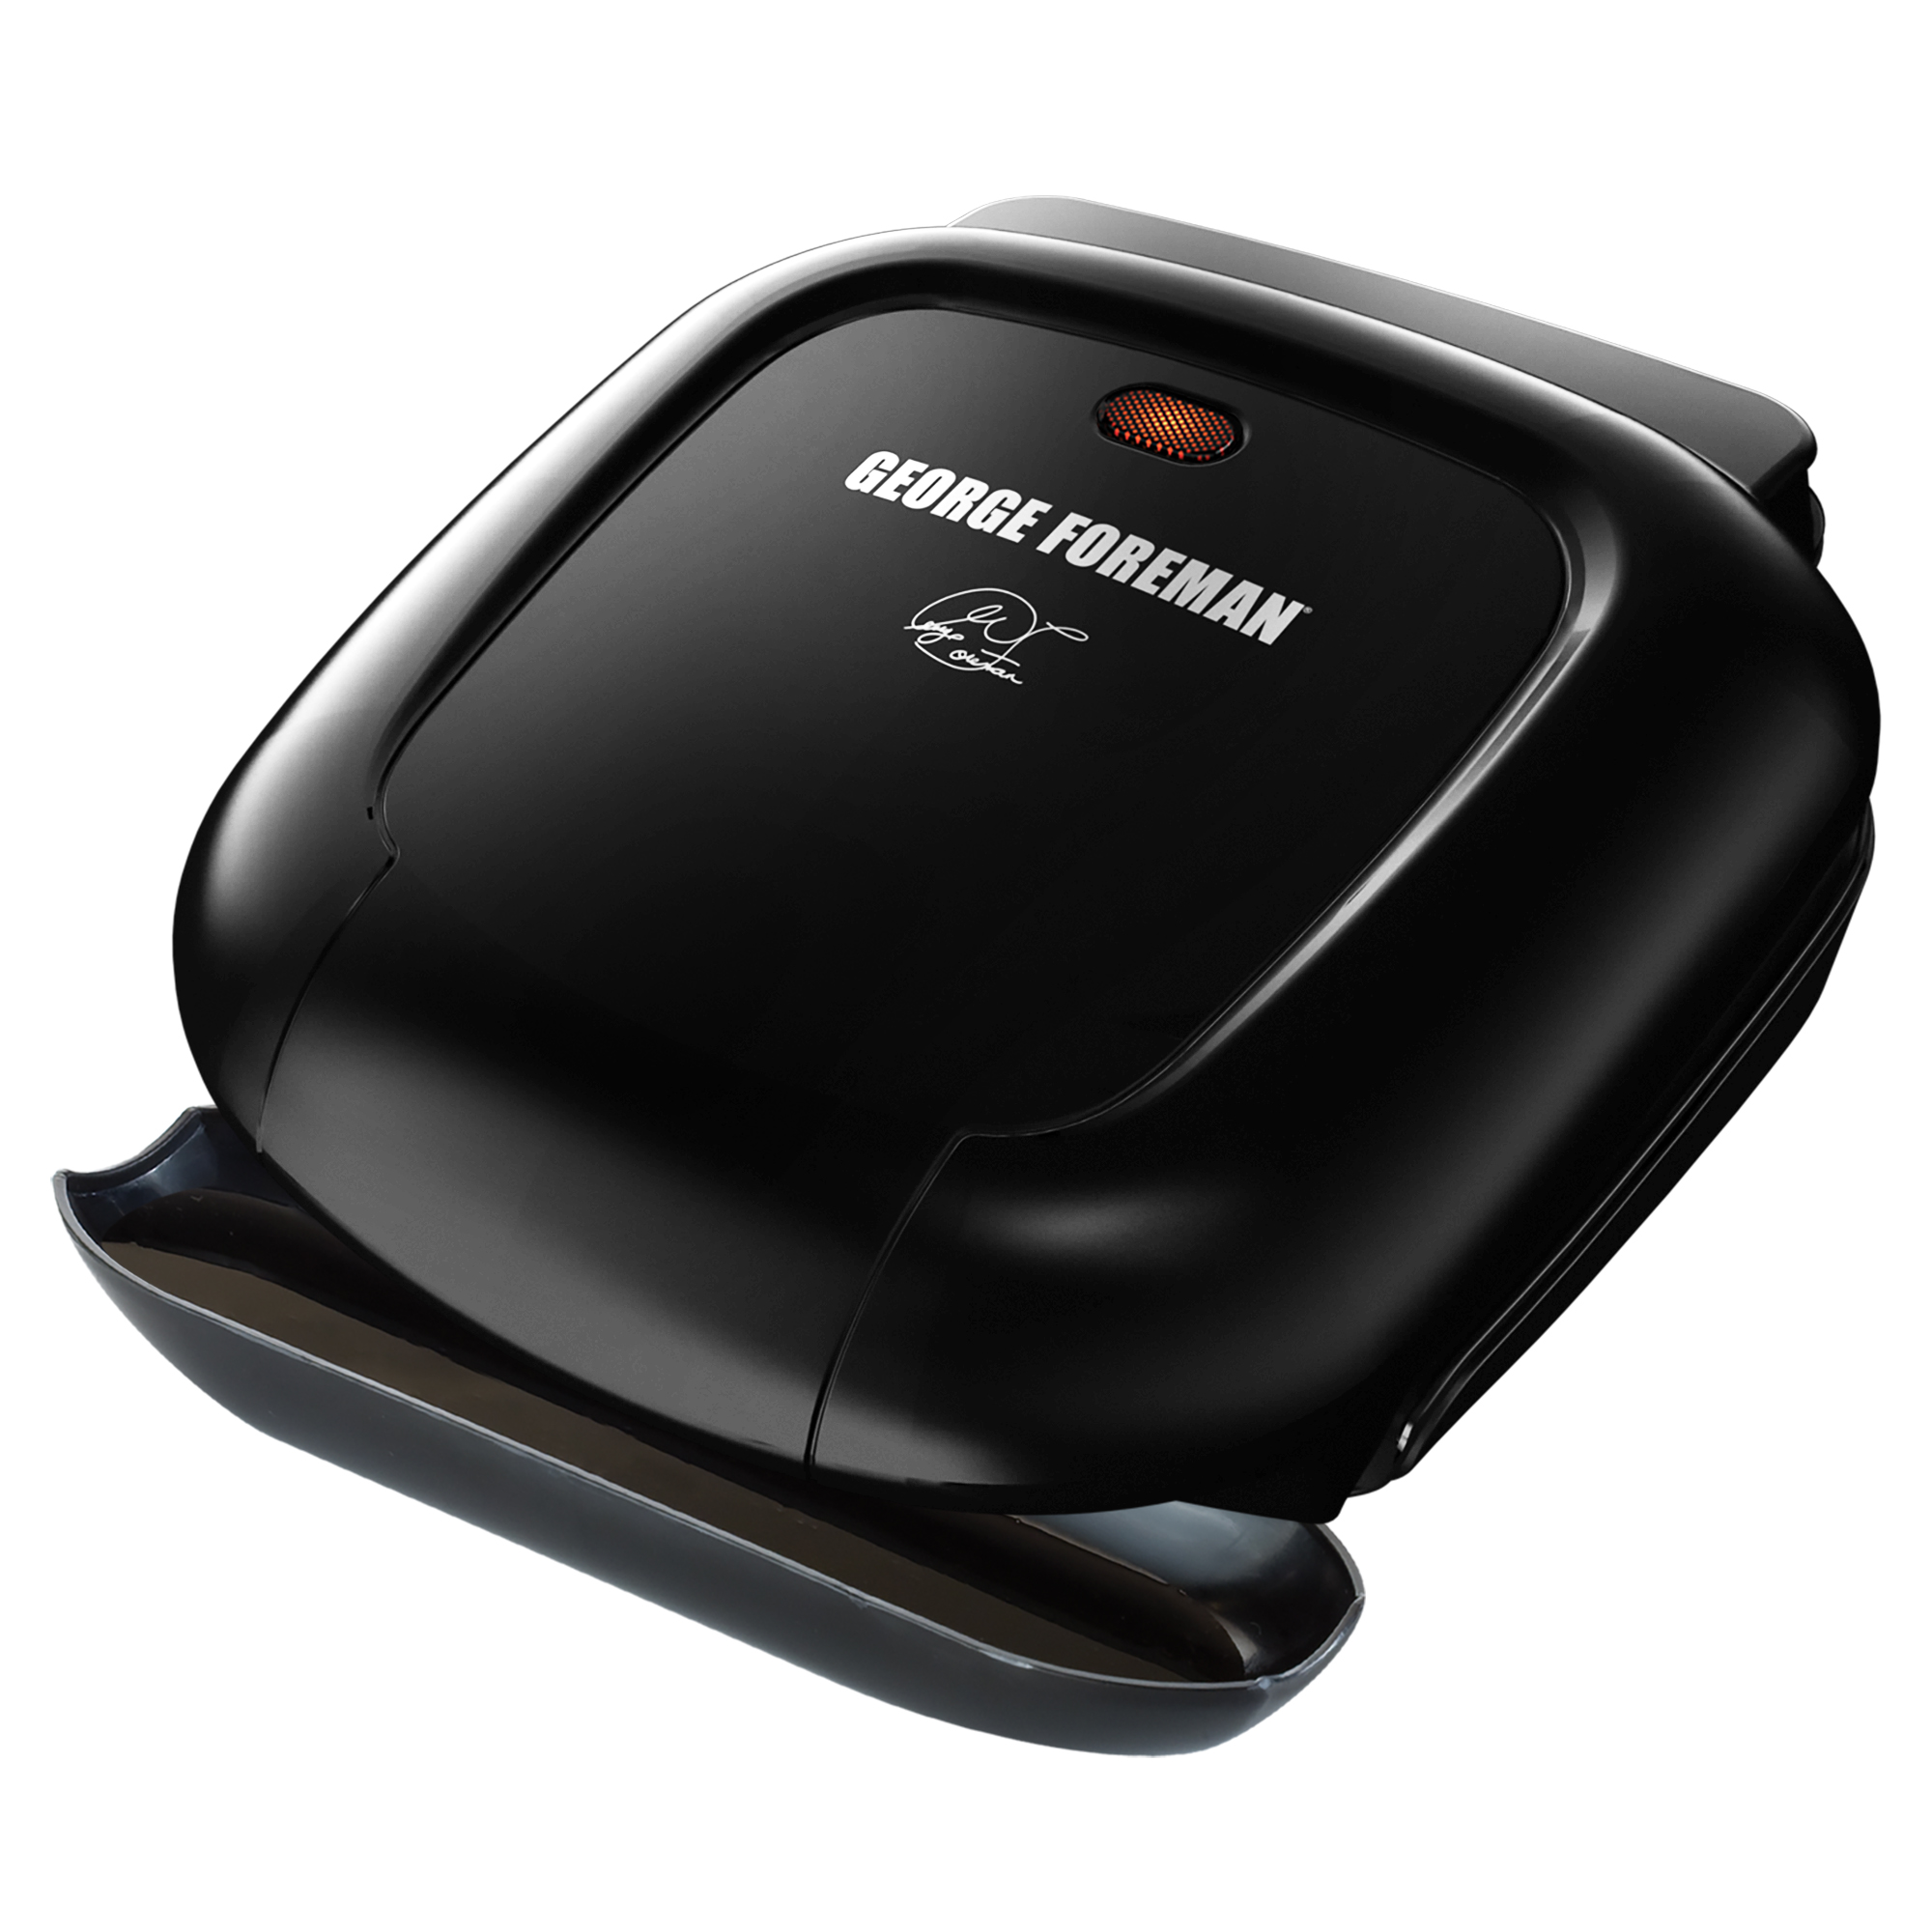 George Foreman 2-Serving Classic Plate Electric Indoor Grill and Panini Press, Black , GR0040B - image 1 of 7